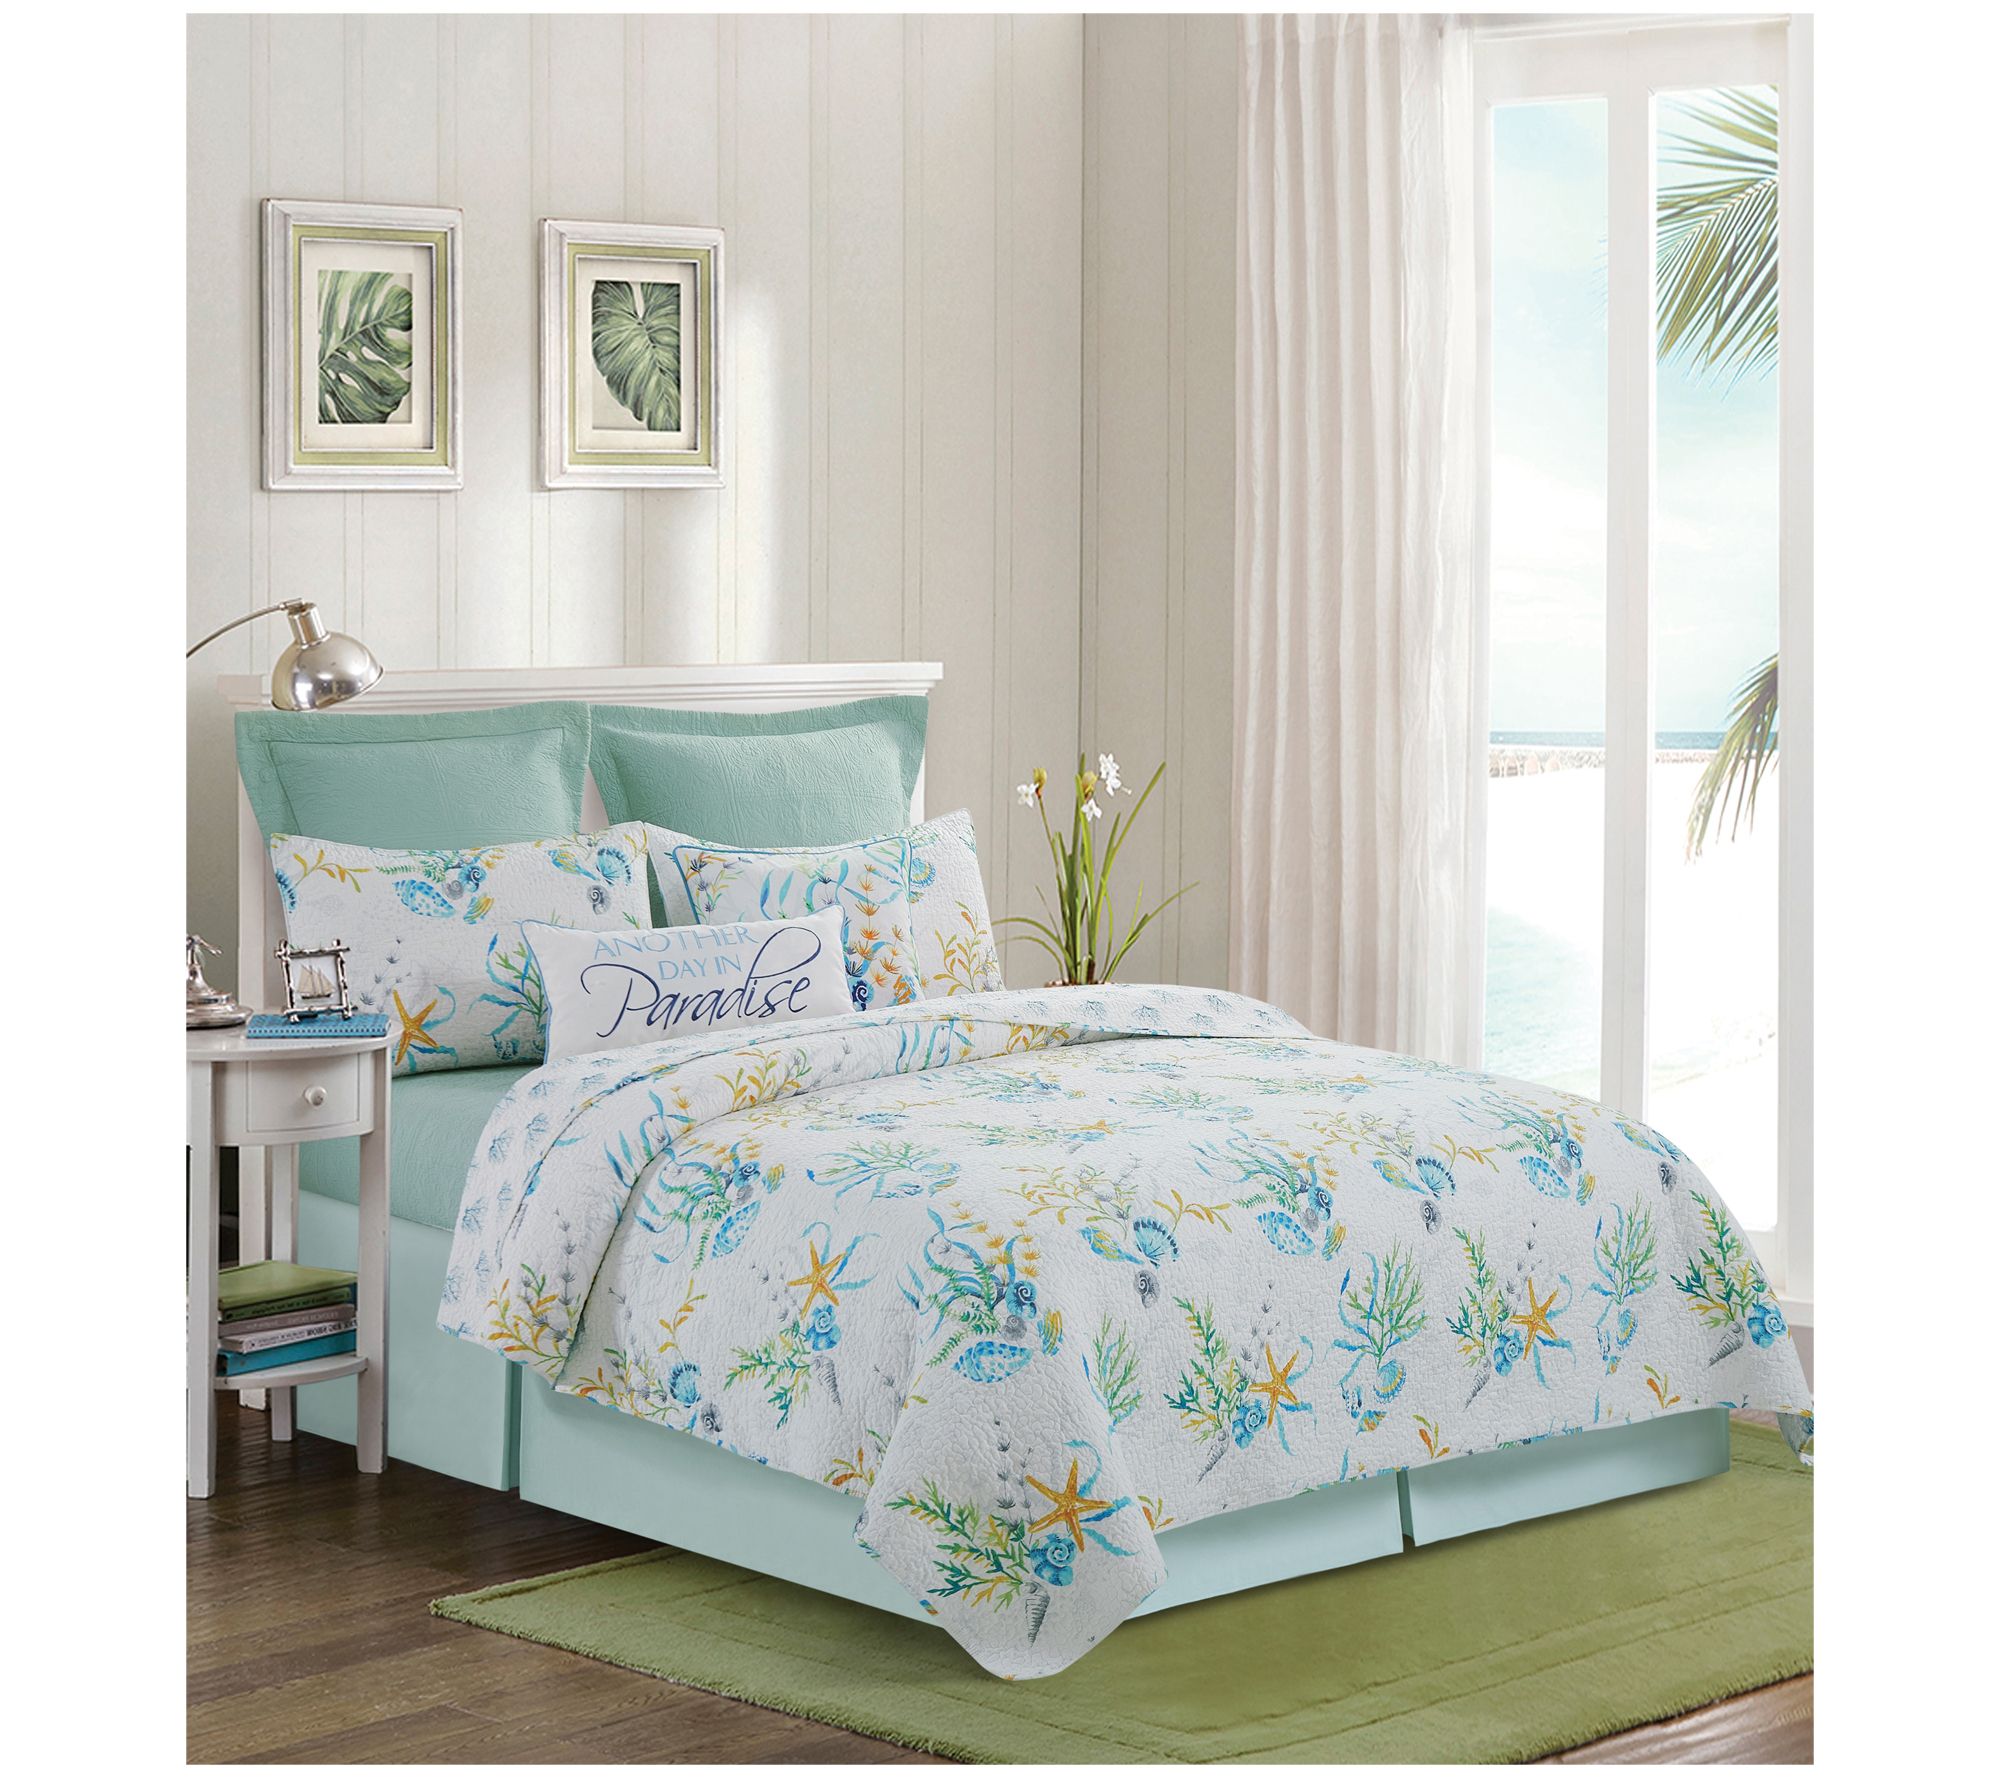 Marlowe Sound Full/Queen Quilt Set by Valerie - QVC.com